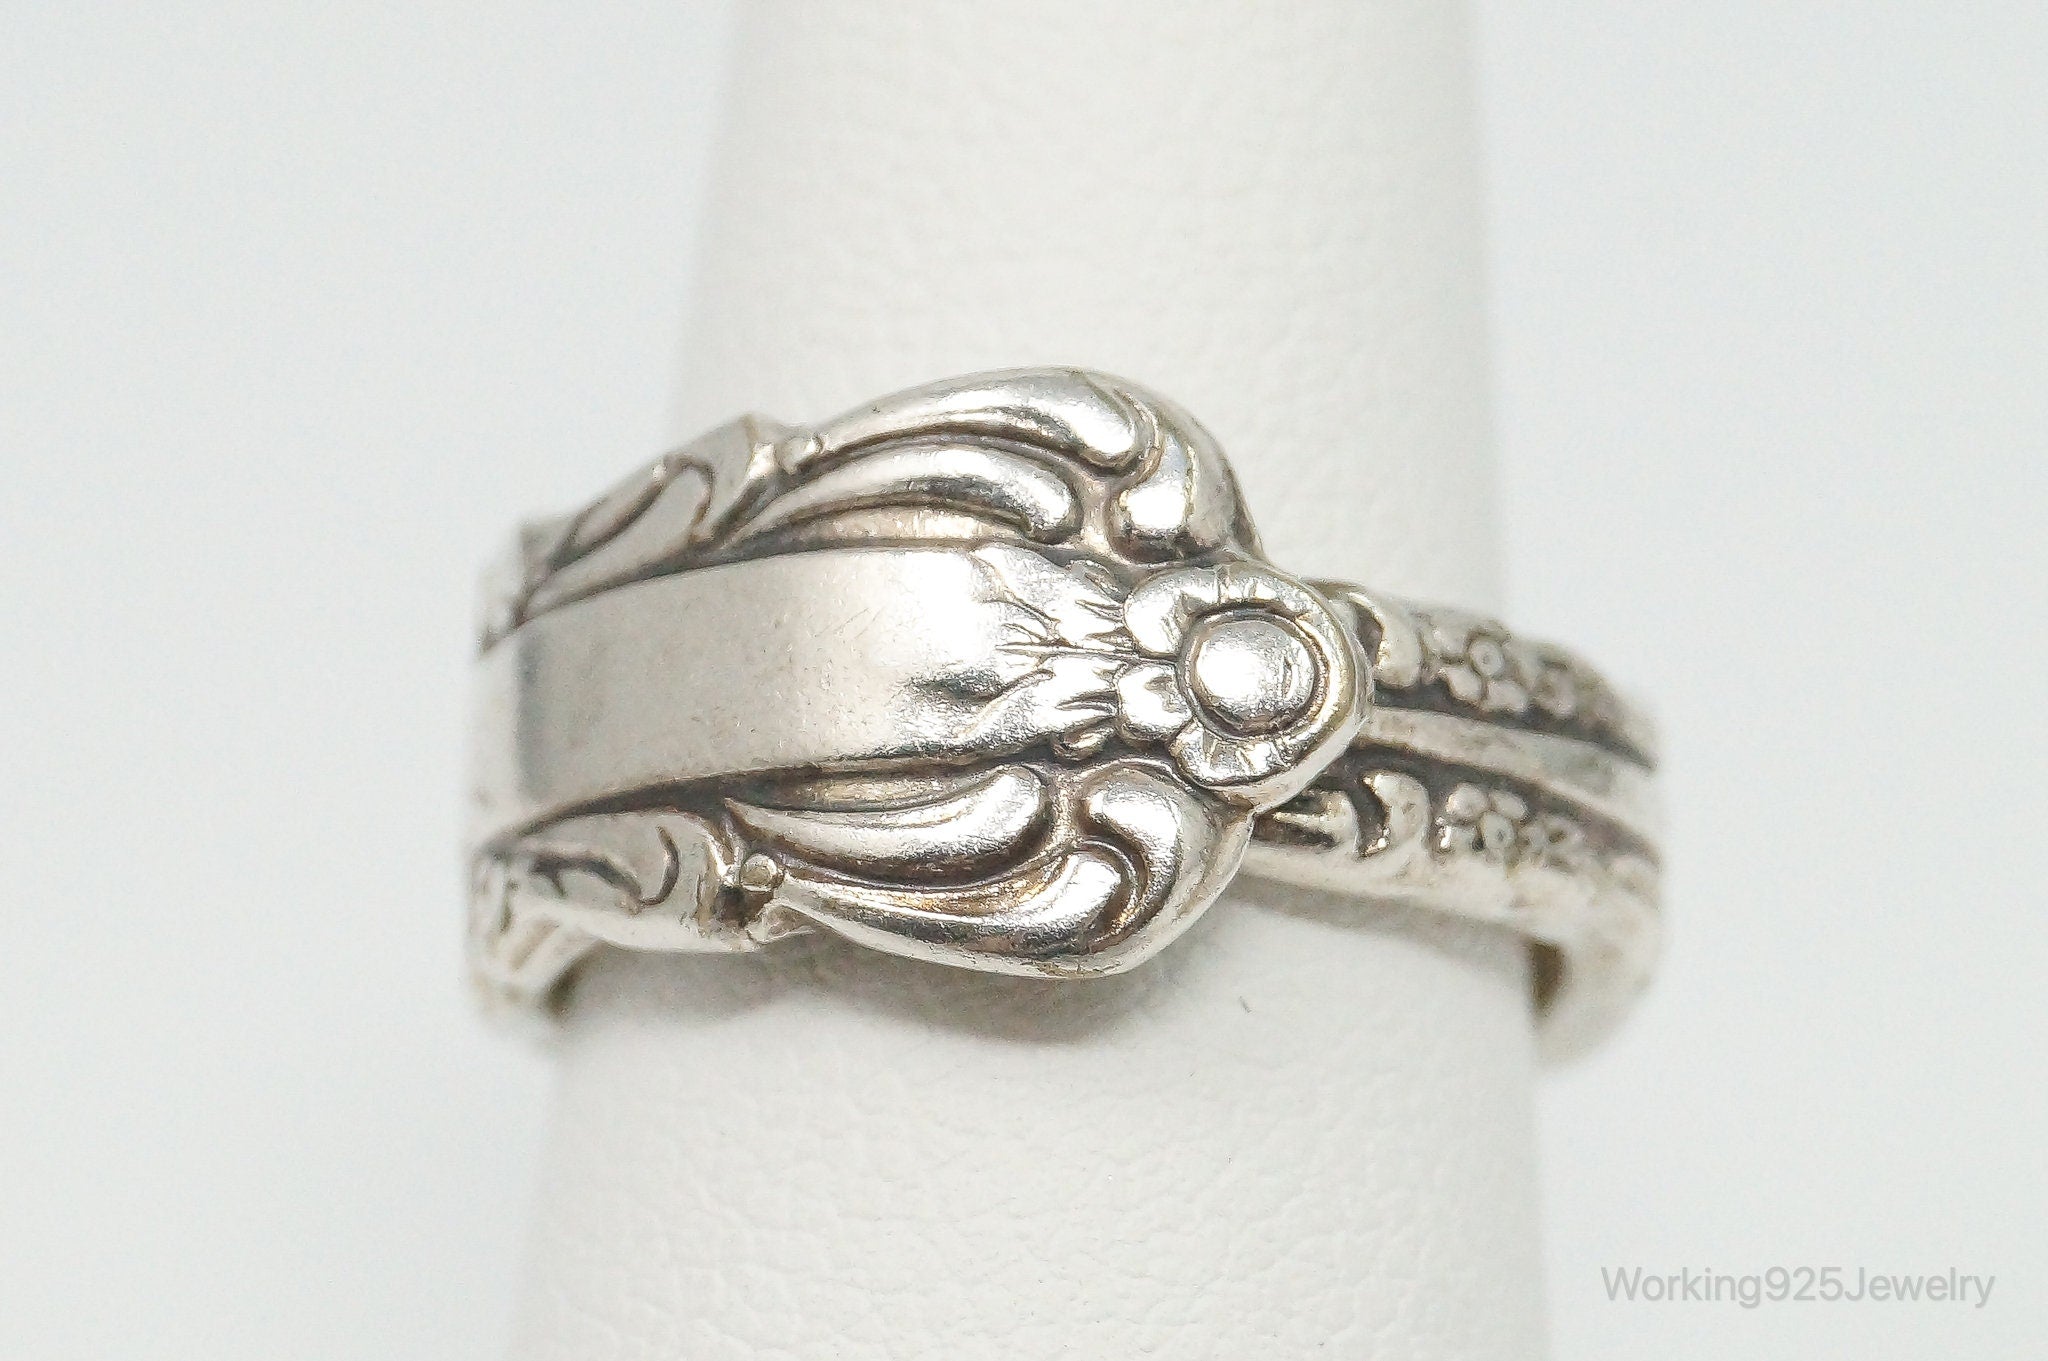 Antique 1881 Rogers Oneida Spoon Wrap Silver Ring - Size 4.75